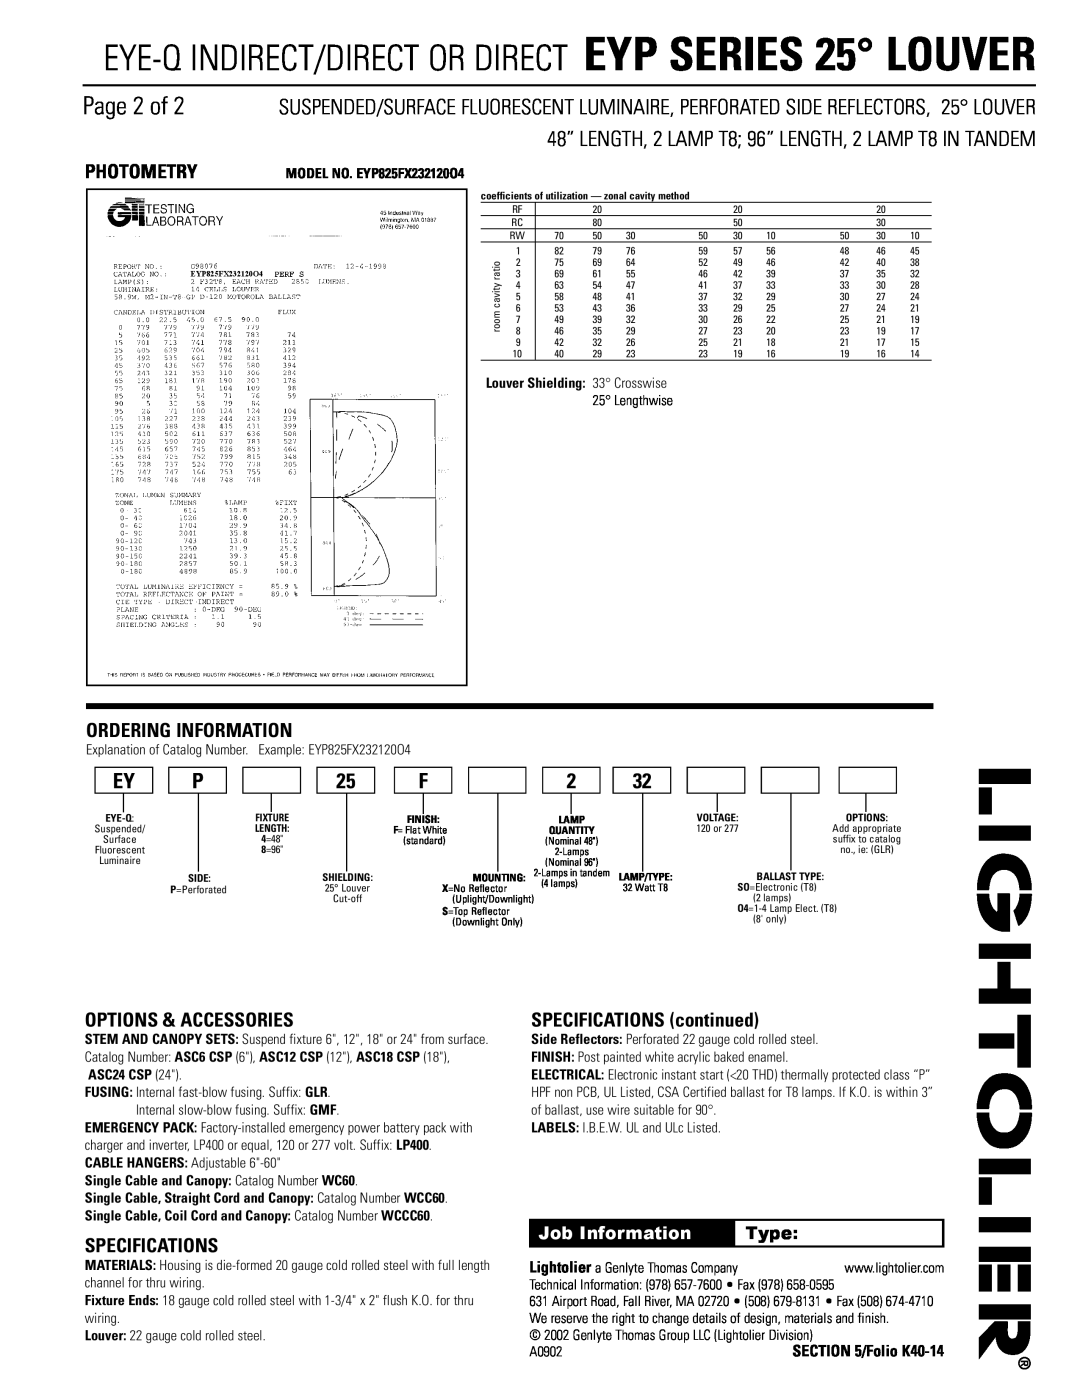 Lightolier EYP Series Page 2 of, Photometry, Ordering Information, Options & Accessories, Specifications, Job Information 